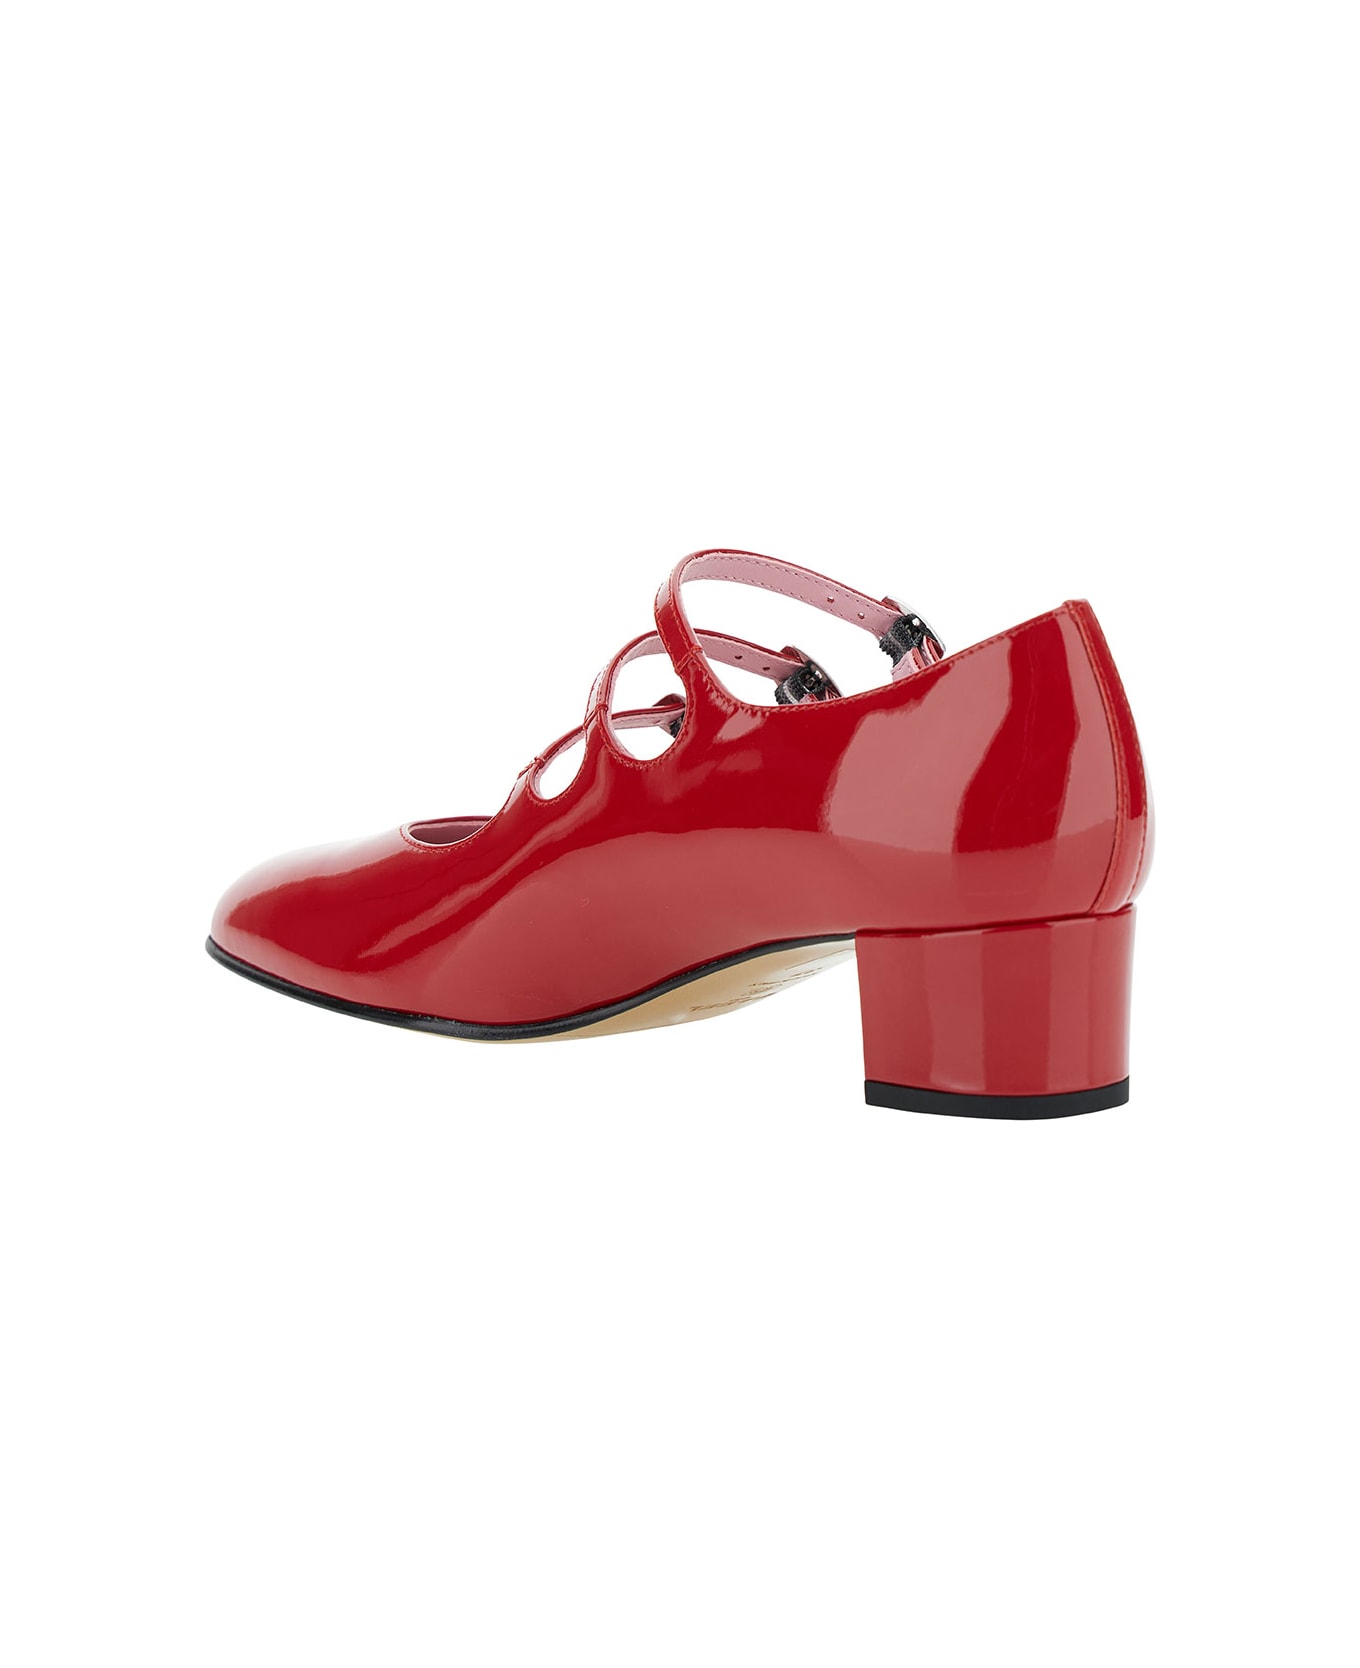 Carel 'kina' Red Mary Janes With Straps And Block Heel In Patent Leather Woman - Red